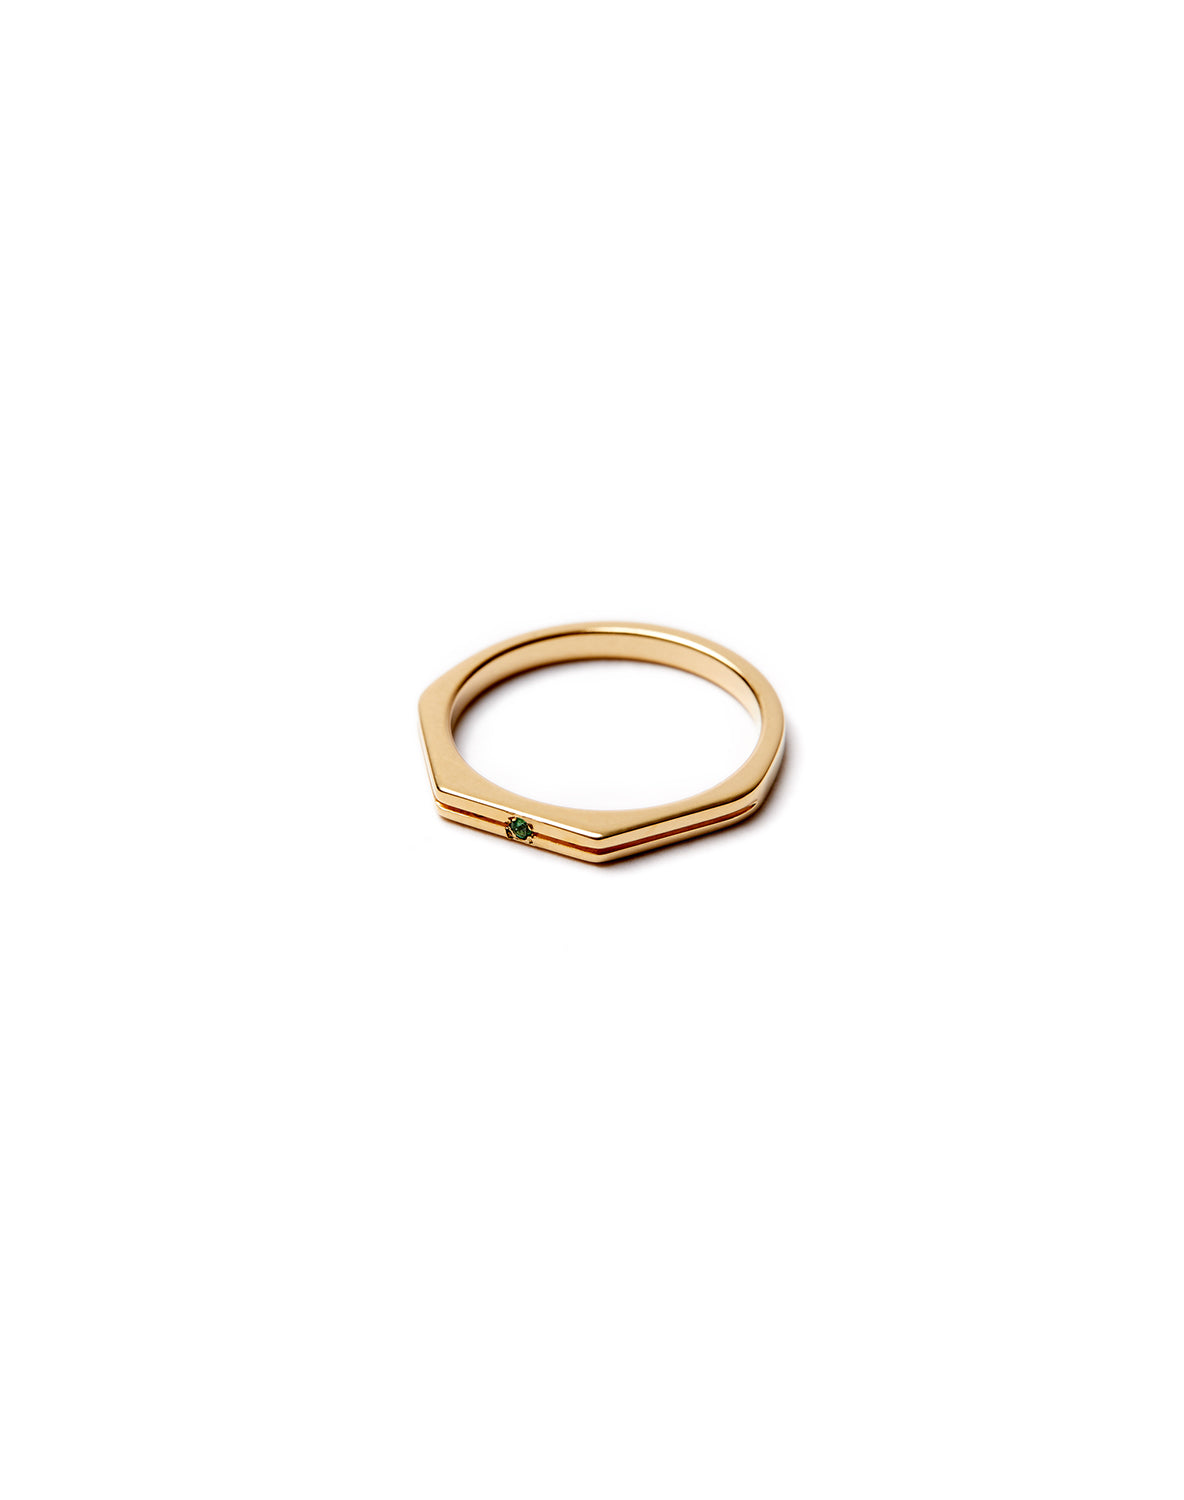 Small spark ring